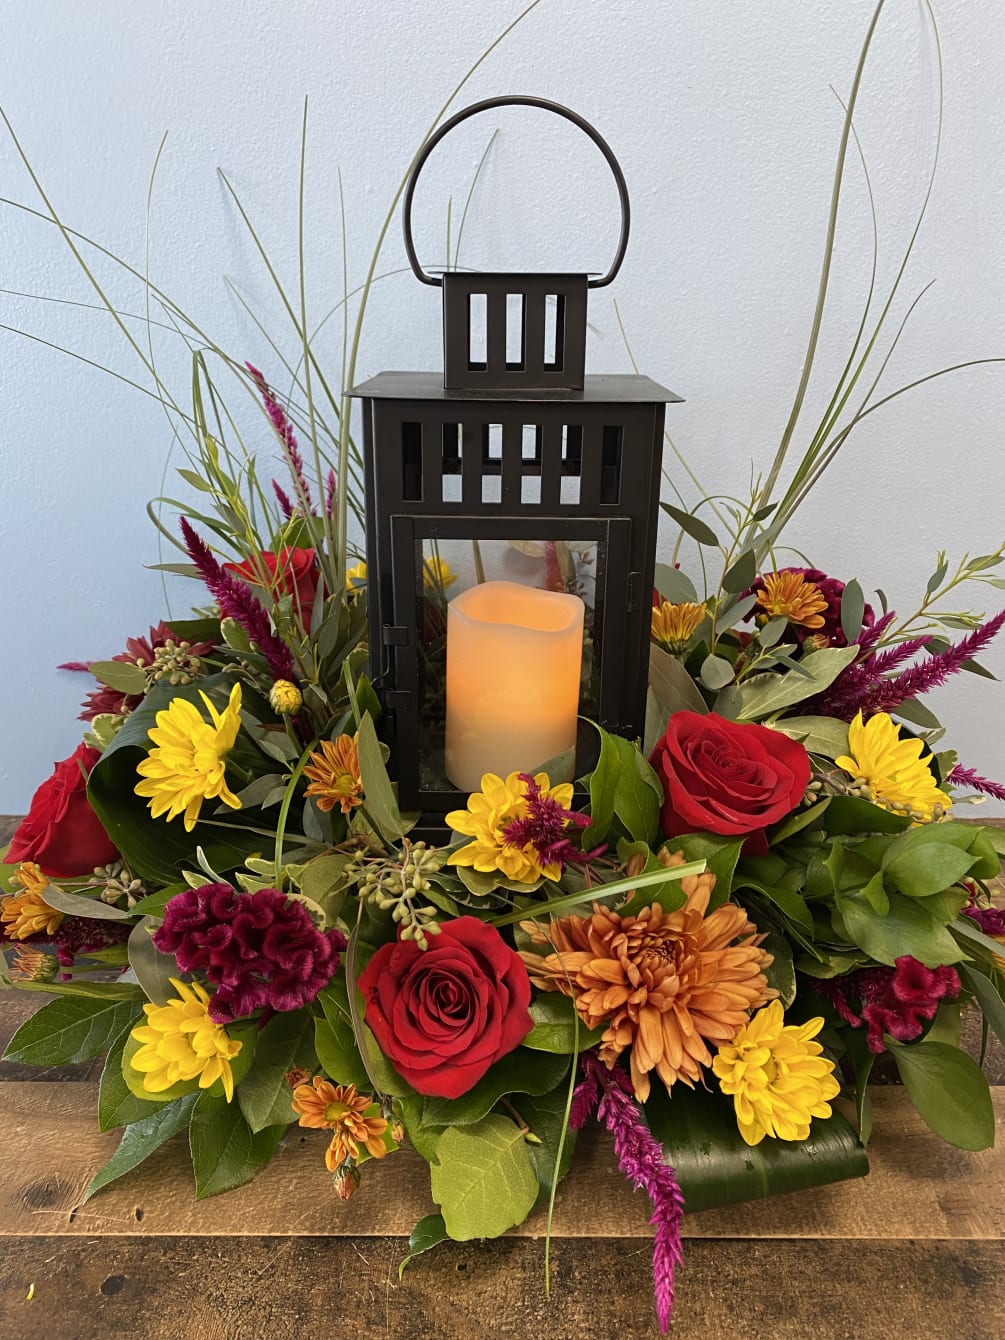 Beautiful arrangement of seasonal flowers around a lantern with battery operated candle.